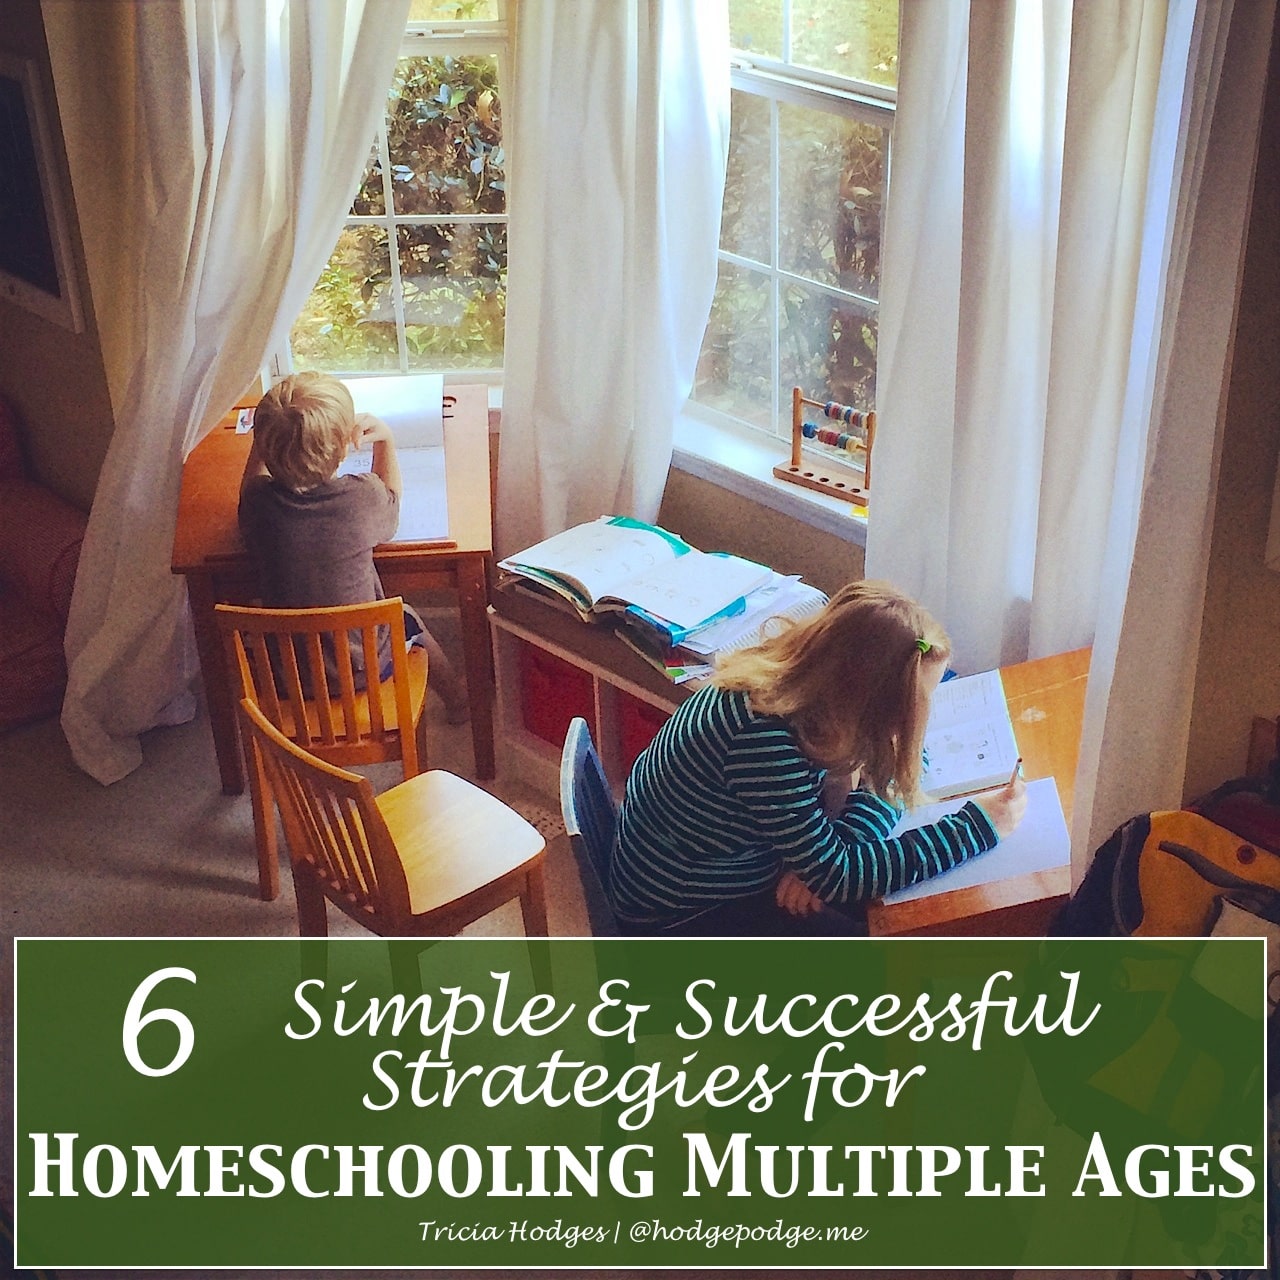 I am sharing the best of our helpful homeschool habits for multiple ages all in one handy spot. I have also included the sprinkling of photos and collages from this homeschool week – those habits in action! Successful strategies for homeschooling a house full.